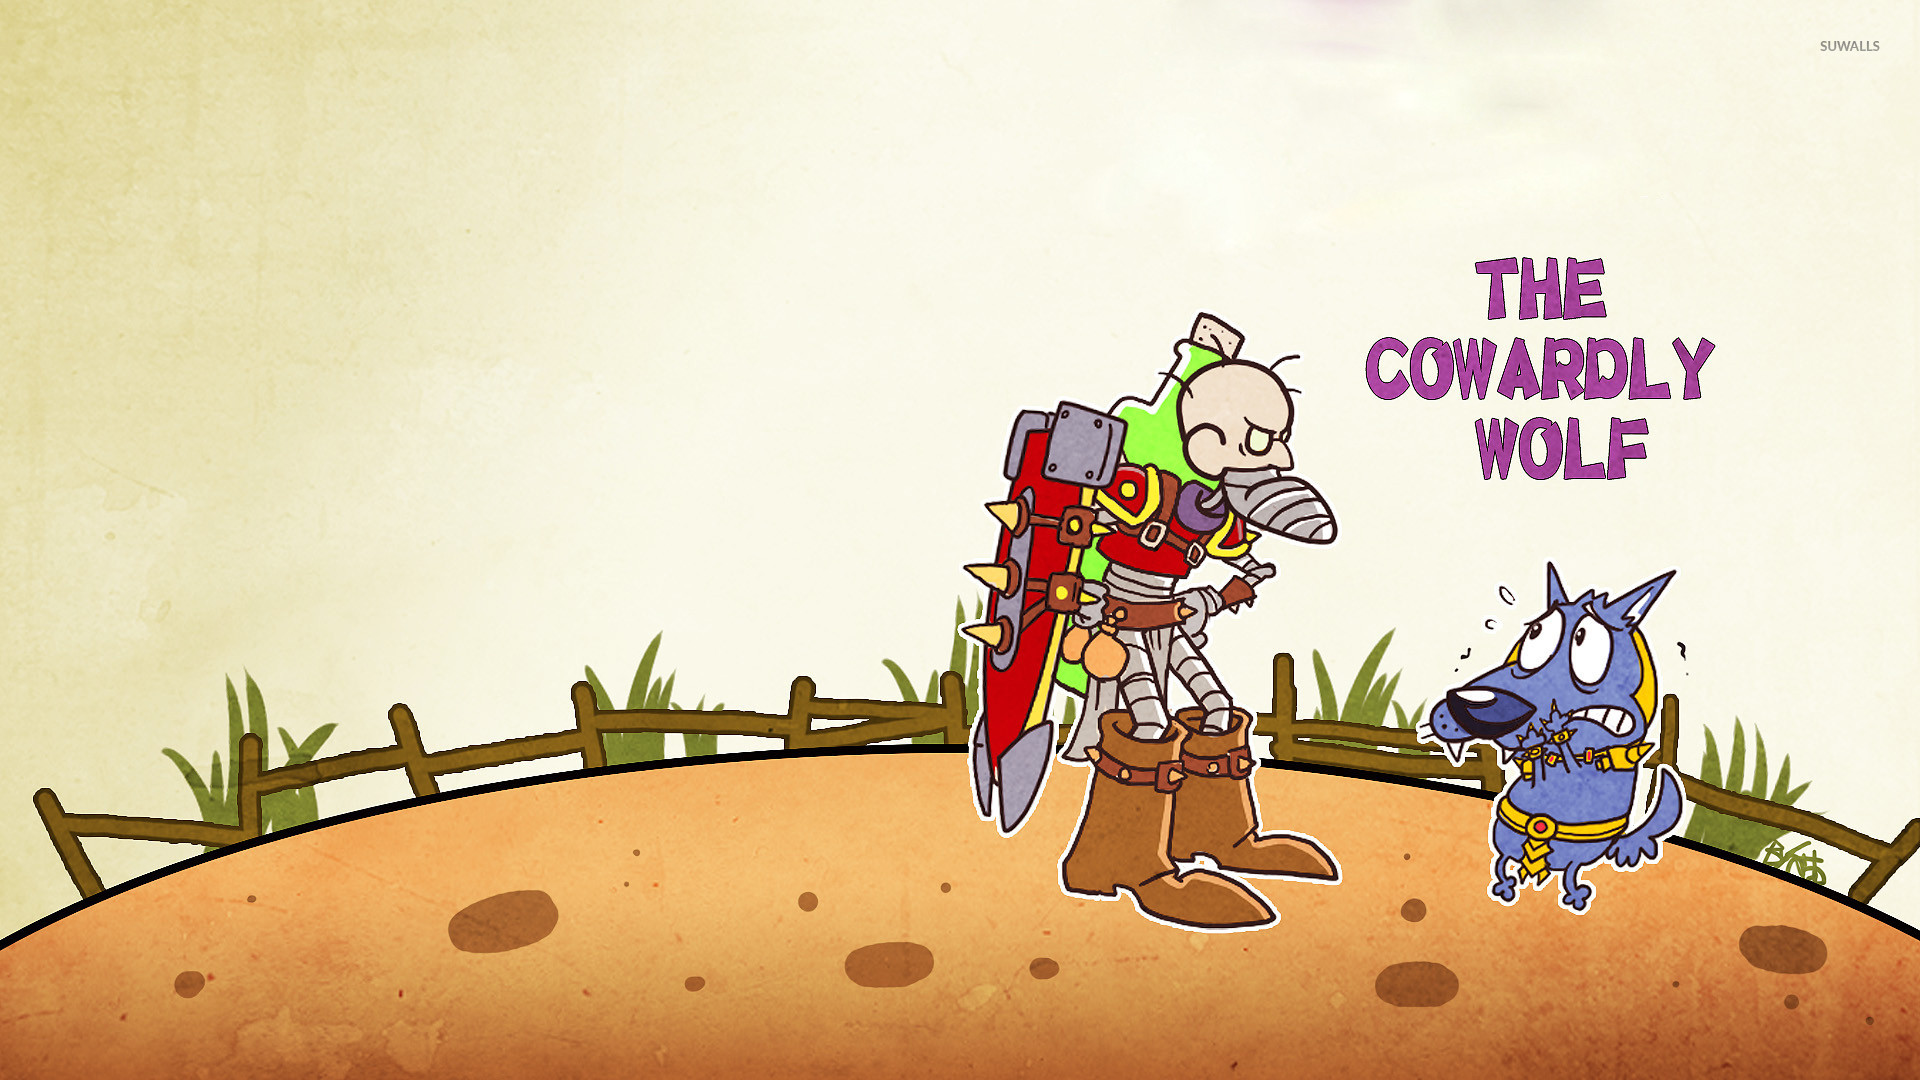 Courage and Eustace from Courage the Cowardly Wolf wallpaper